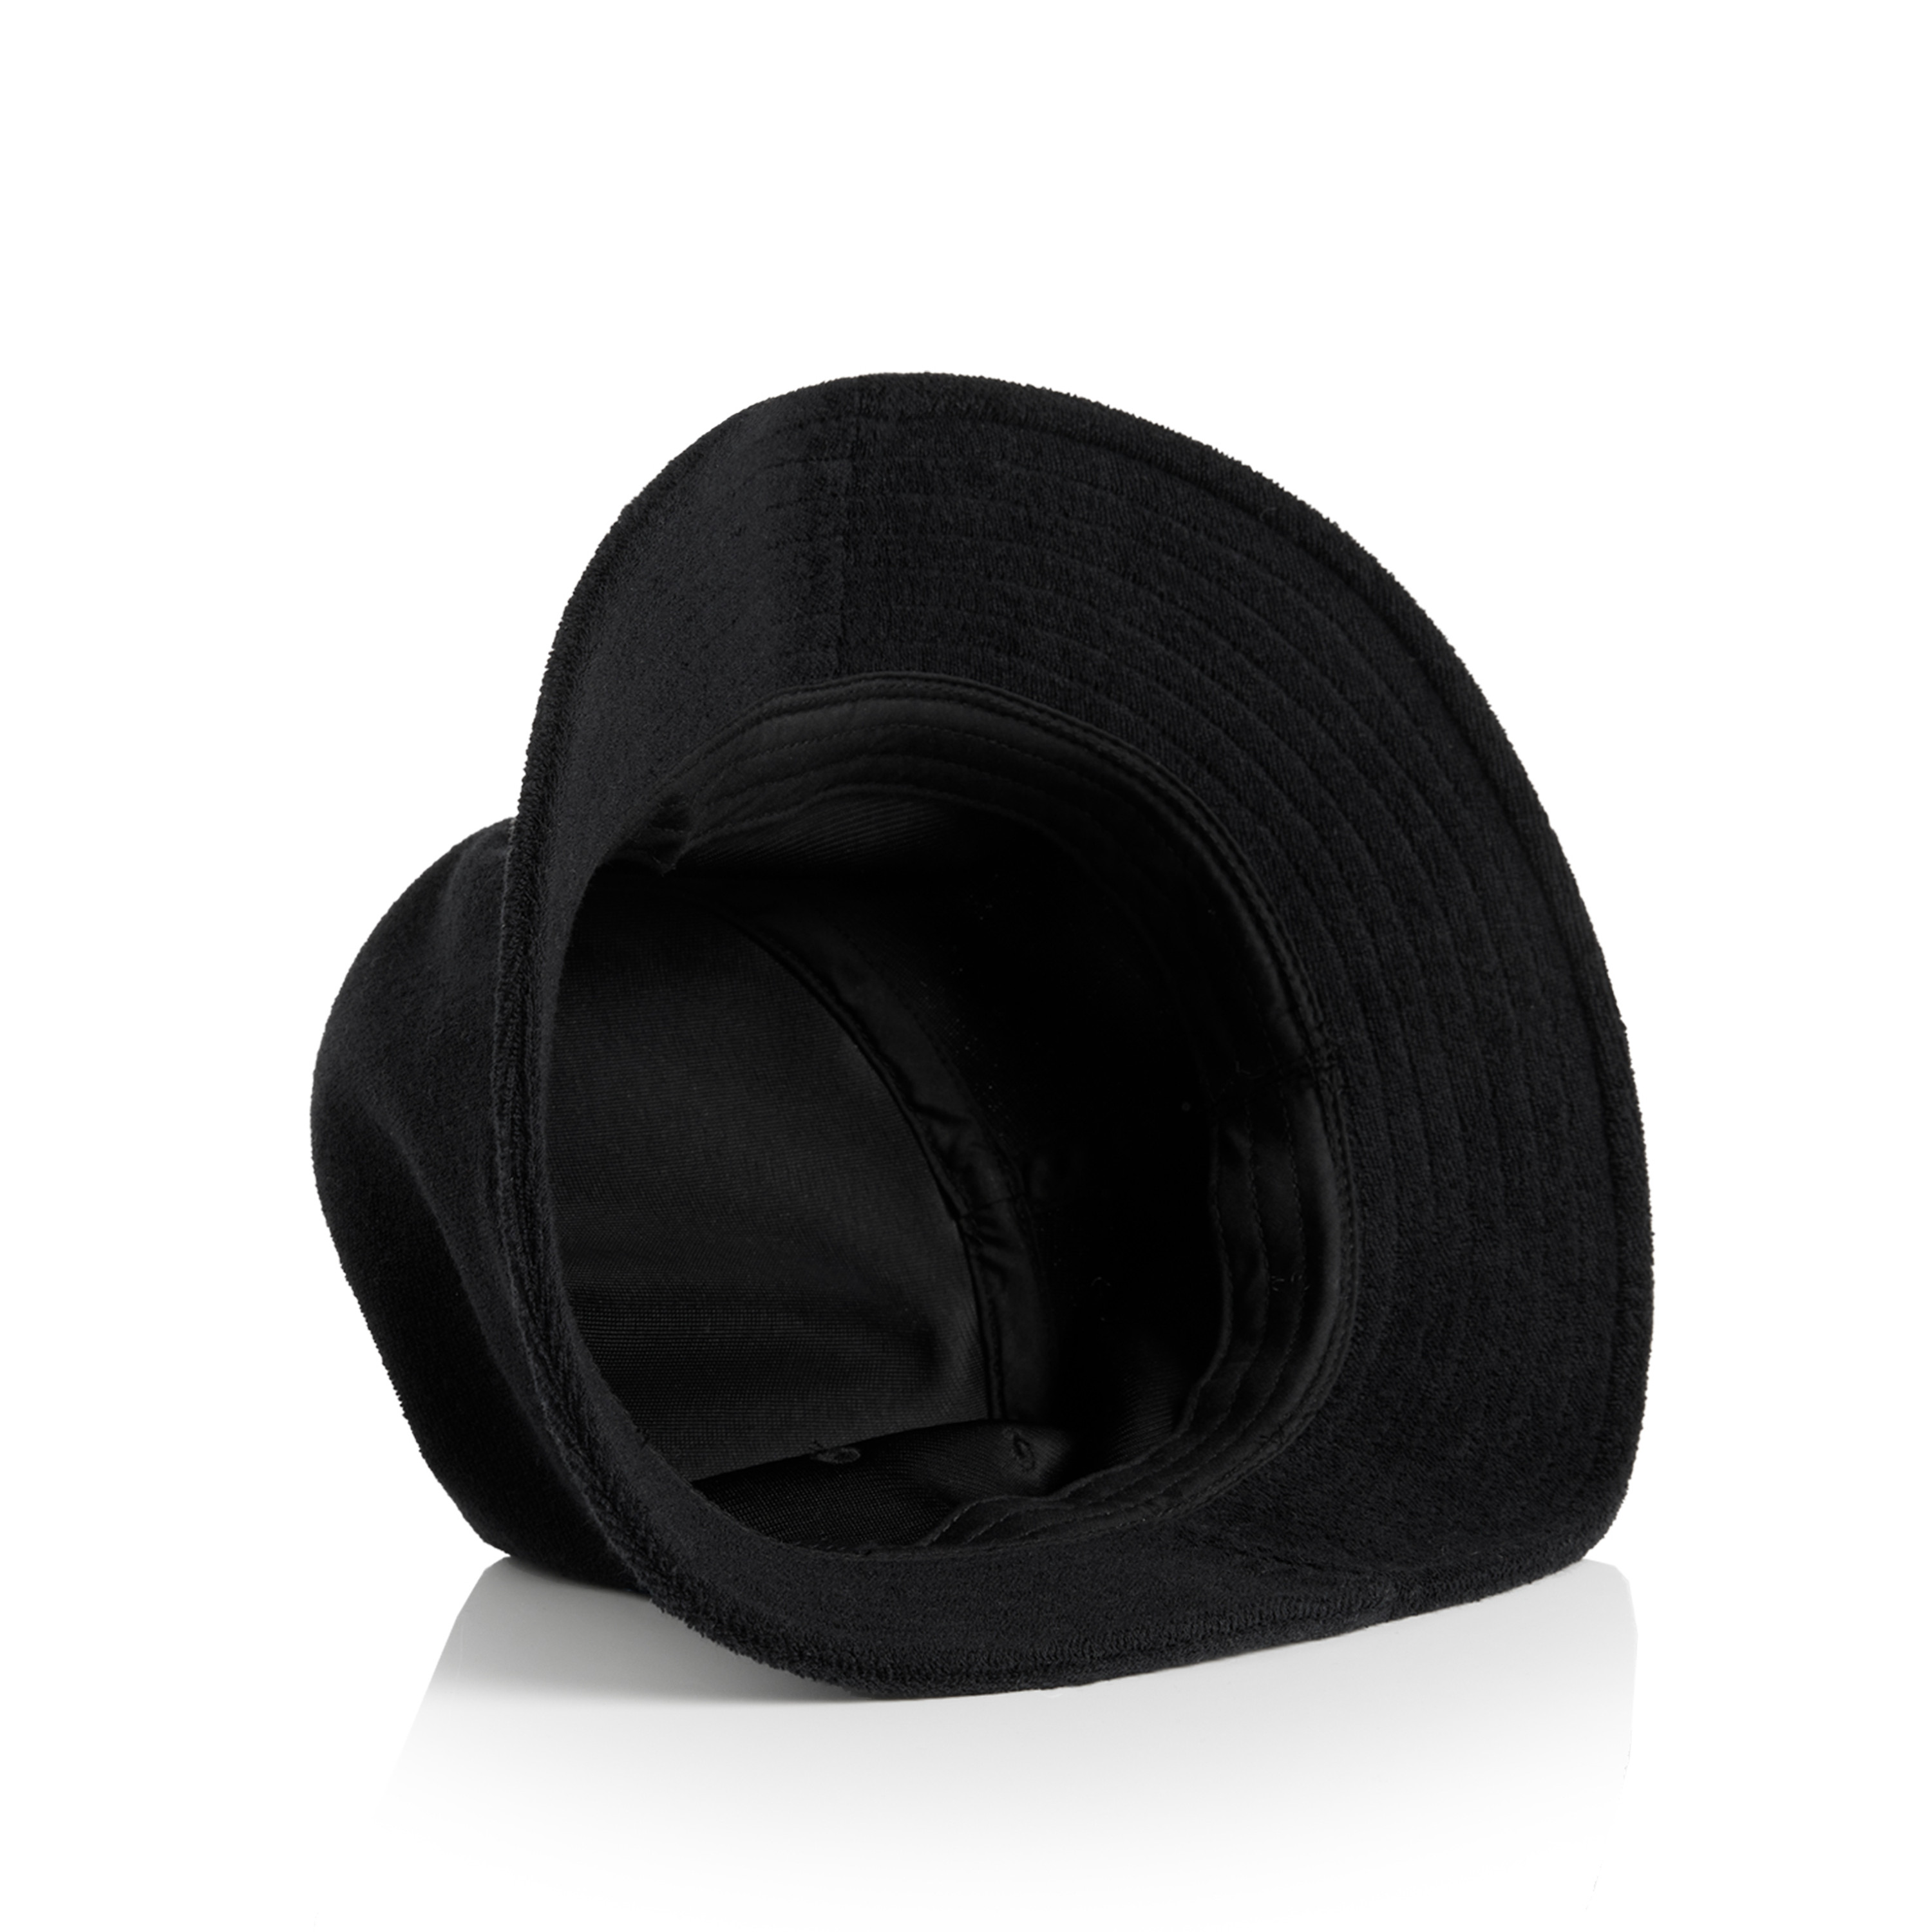 Get A Wholesale zipper bucket hat Order For Less 